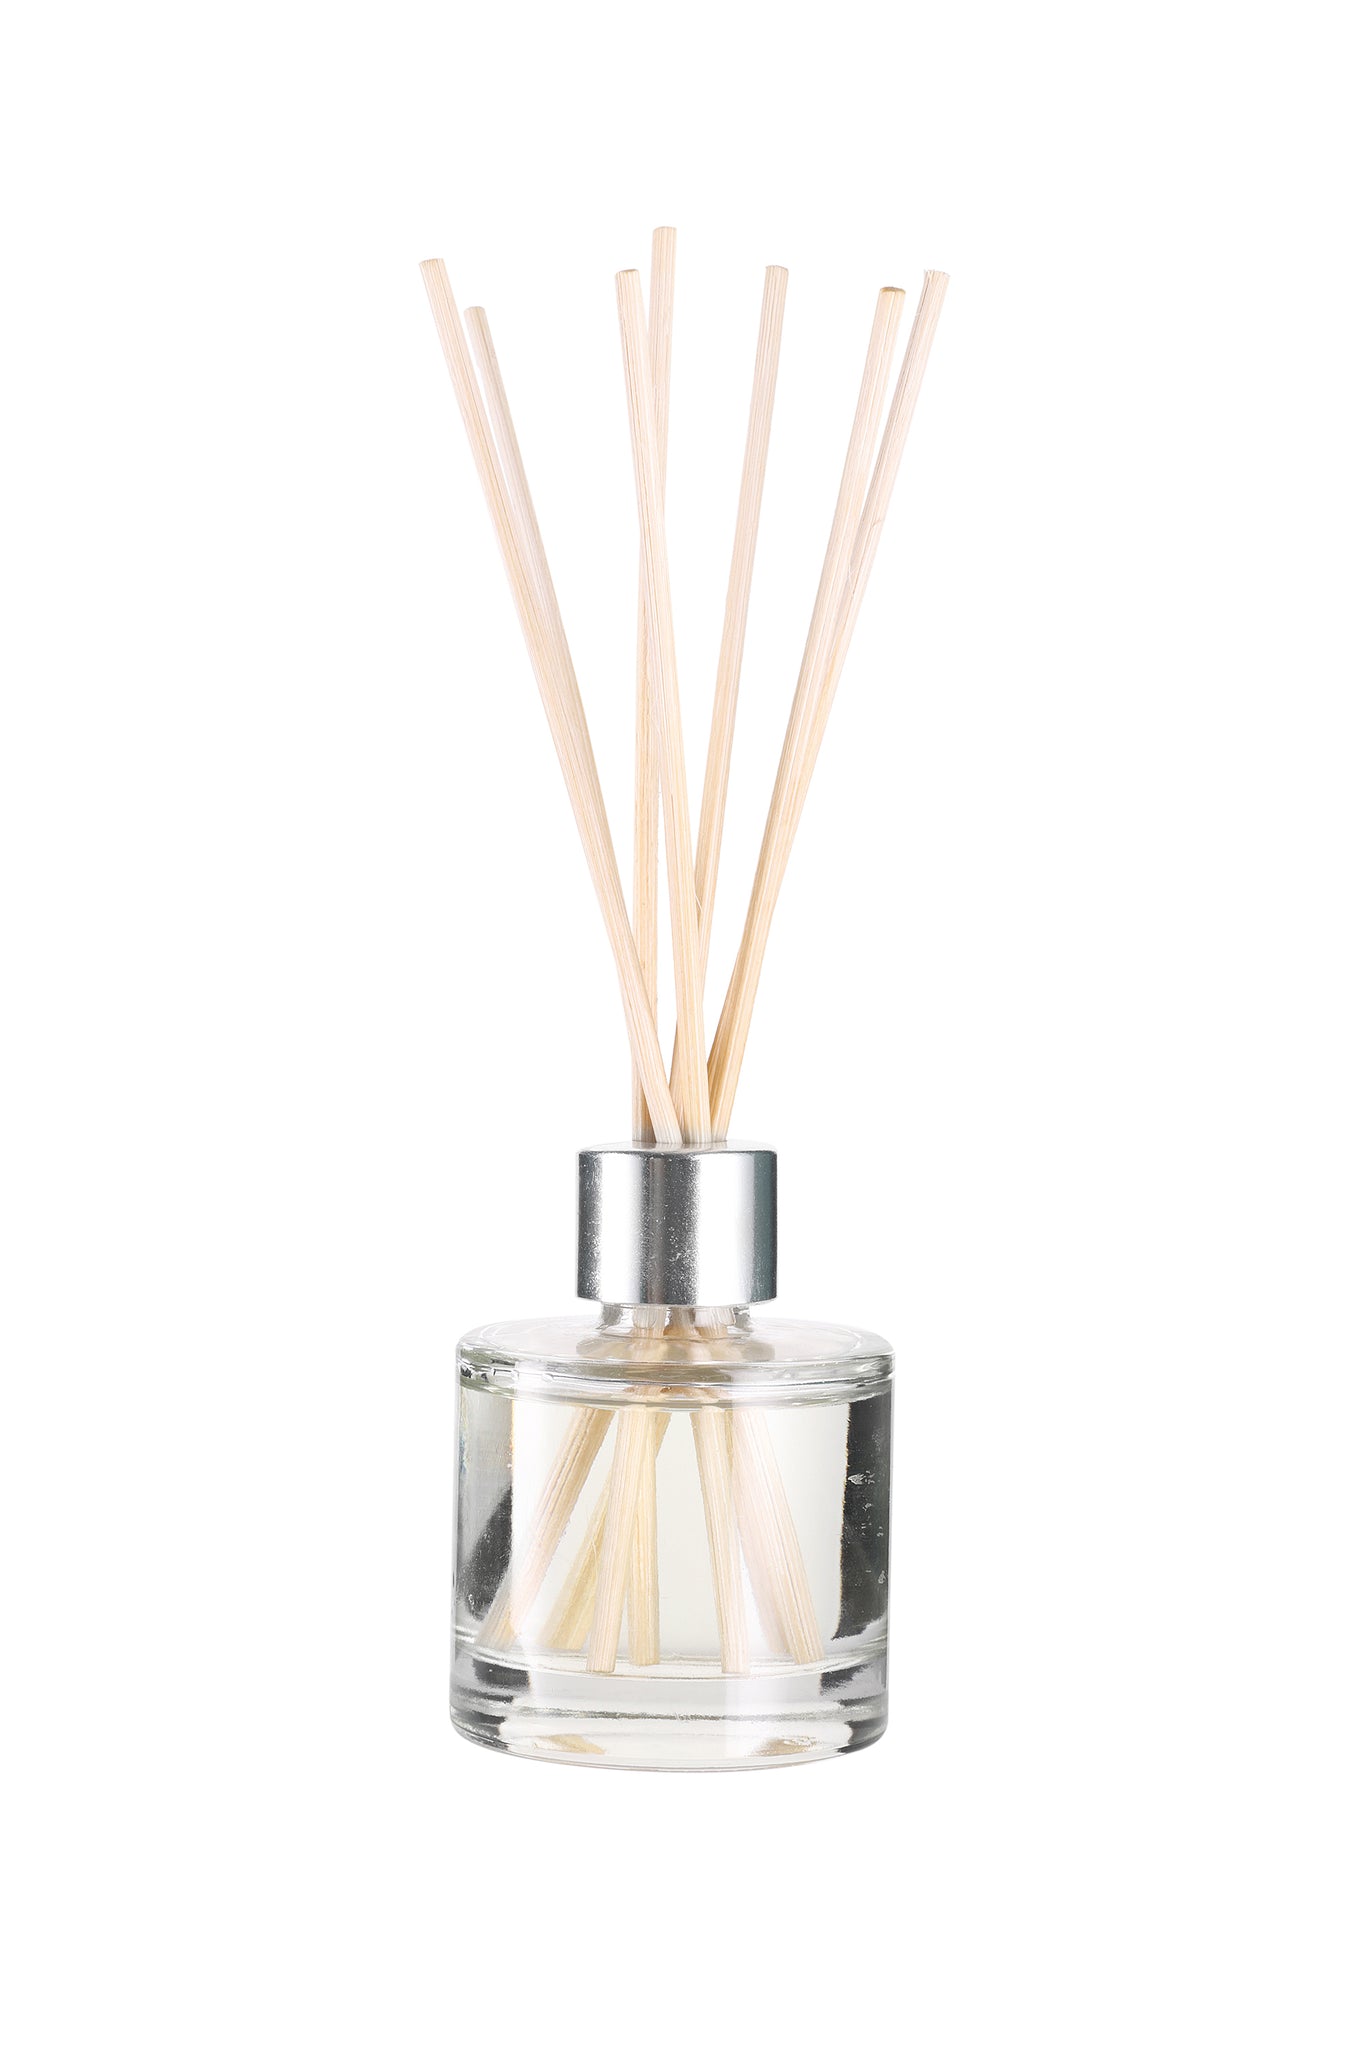 Arofume Reed Diffuser Gift set with Glass Pot,Reed Sticks & Oil Long Lasting Scent for for Home Office (Strawberry Pink Fragrance)